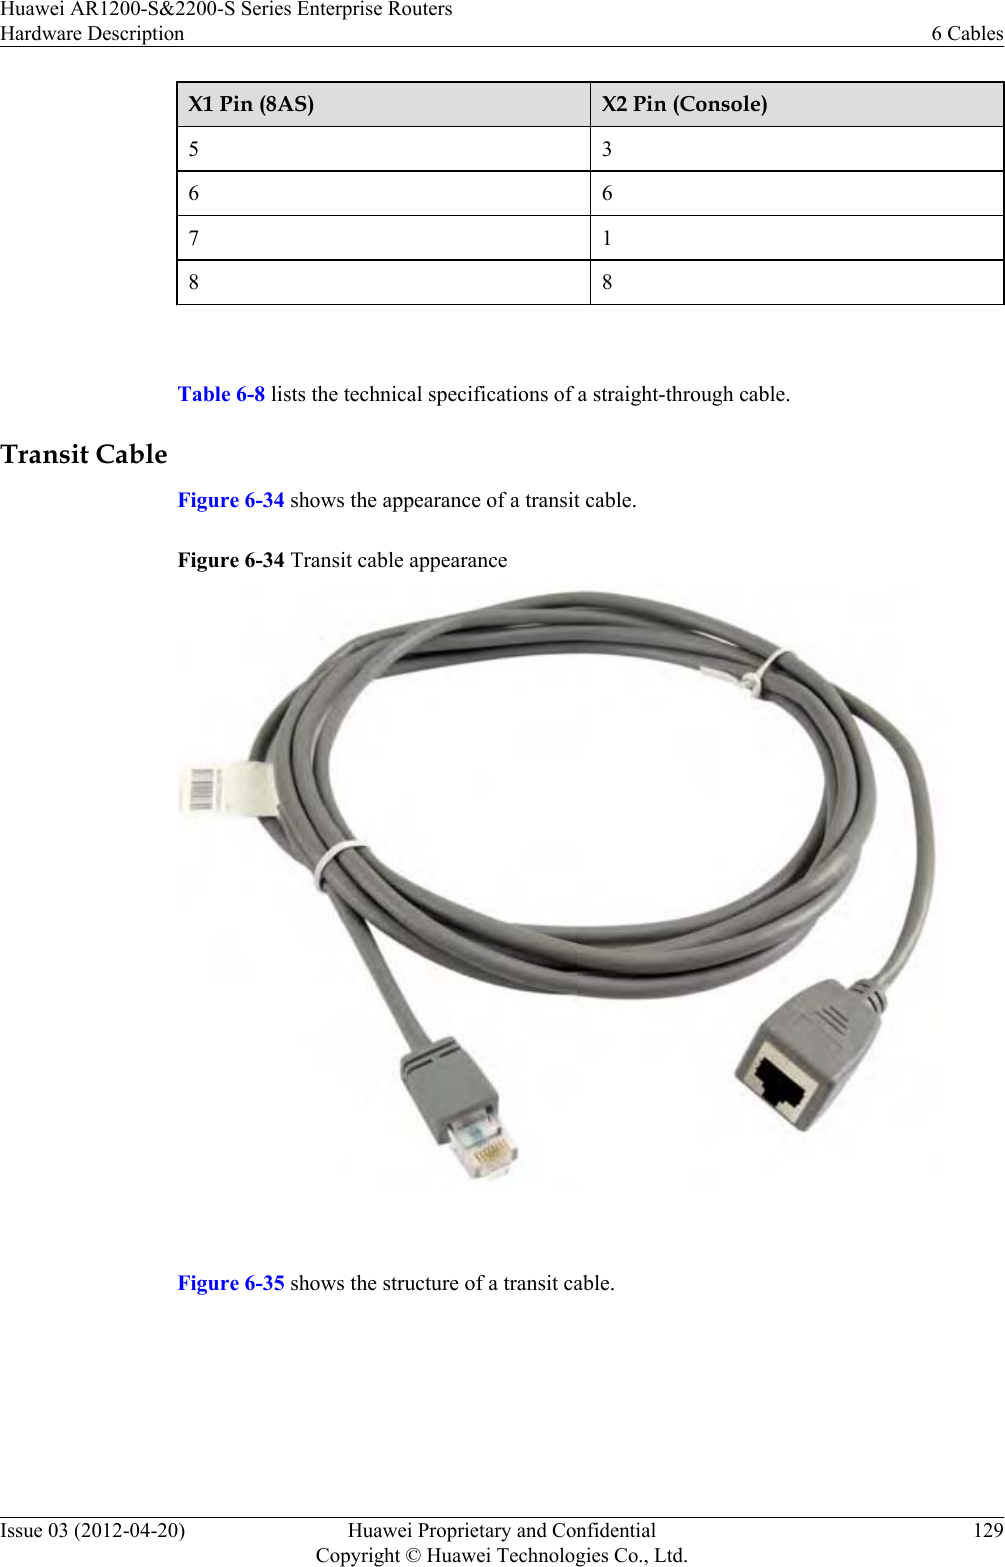 X1 Pin (8AS) X2 Pin (Console)5 36 67 18 8 Table 6-8 lists the technical specifications of a straight-through cable.Transit CableFigure 6-34 shows the appearance of a transit cable.Figure 6-34 Transit cable appearance Figure 6-35 shows the structure of a transit cable.Huawei AR1200-S&amp;2200-S Series Enterprise RoutersHardware Description 6 CablesIssue 03 (2012-04-20) Huawei Proprietary and ConfidentialCopyright © Huawei Technologies Co., Ltd.129